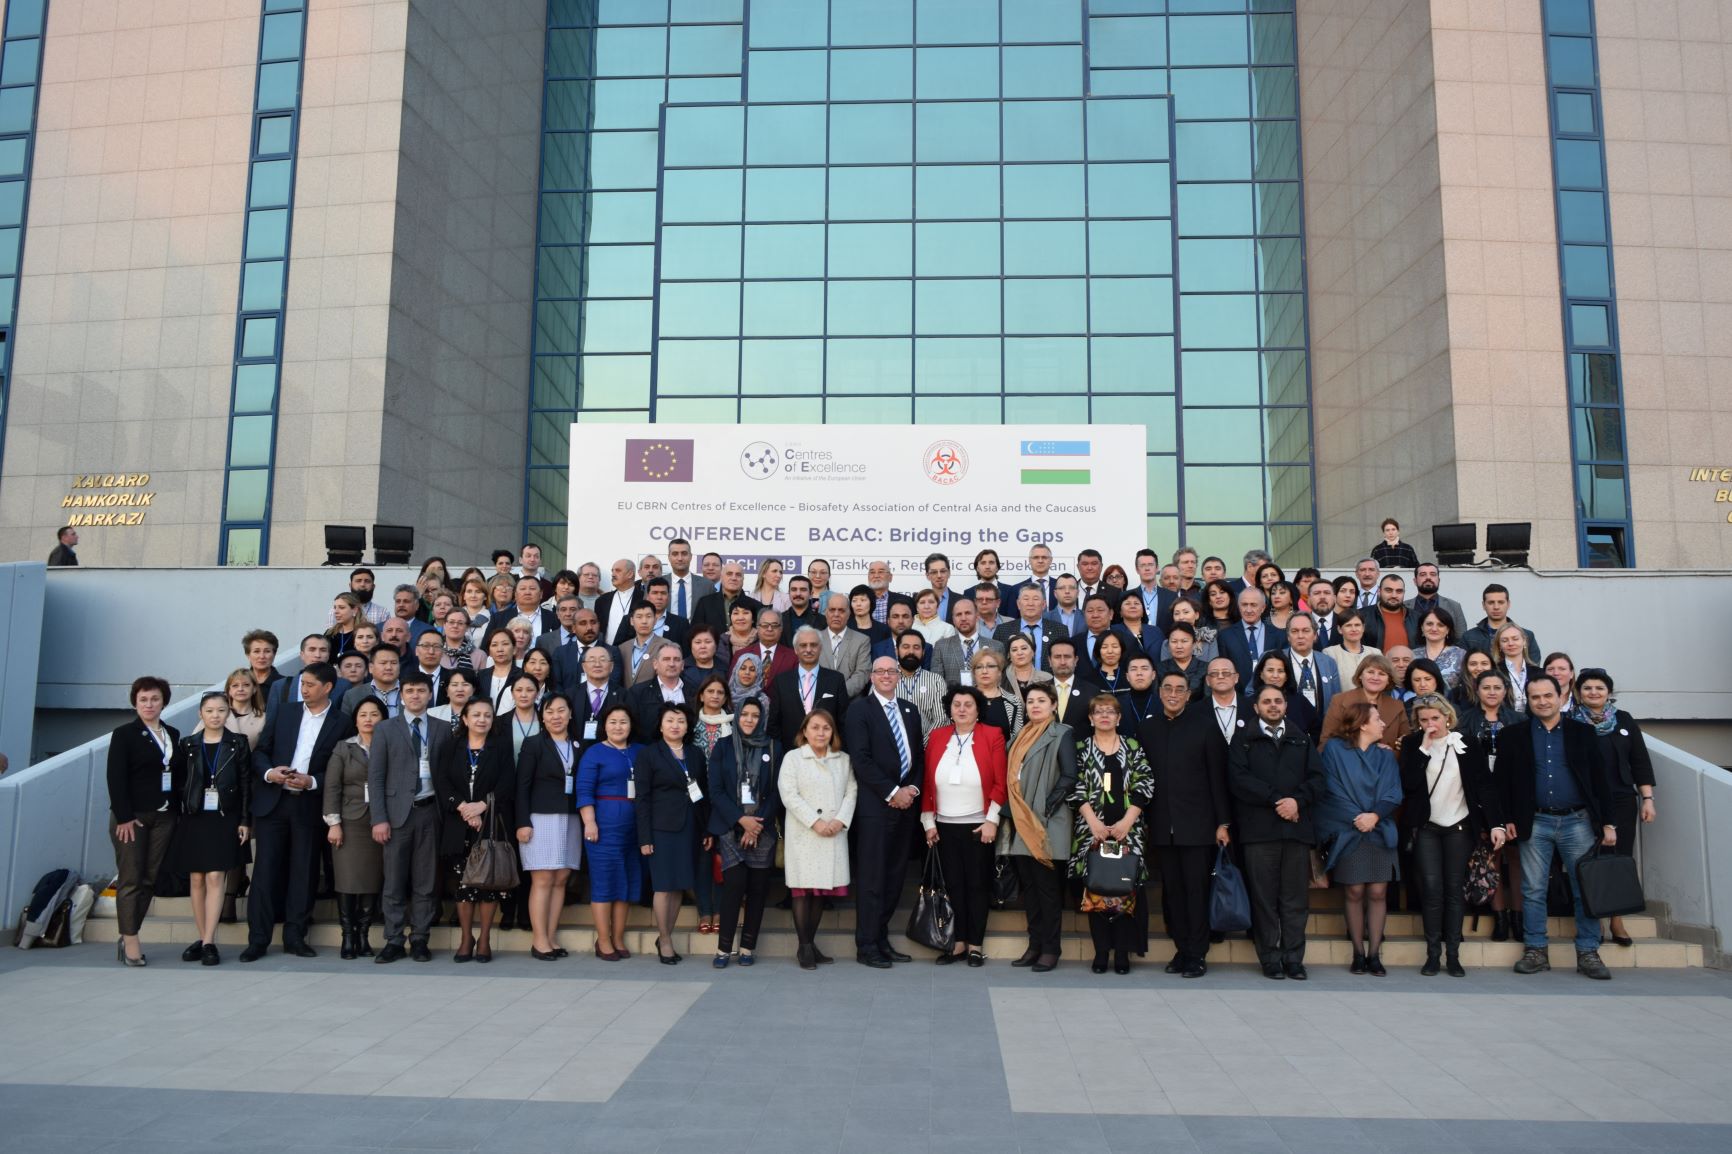 Press Release: EU CBRN Centres of Excellence – Biosafety Association of Central Asia and the Caucasus CONFERENCE 